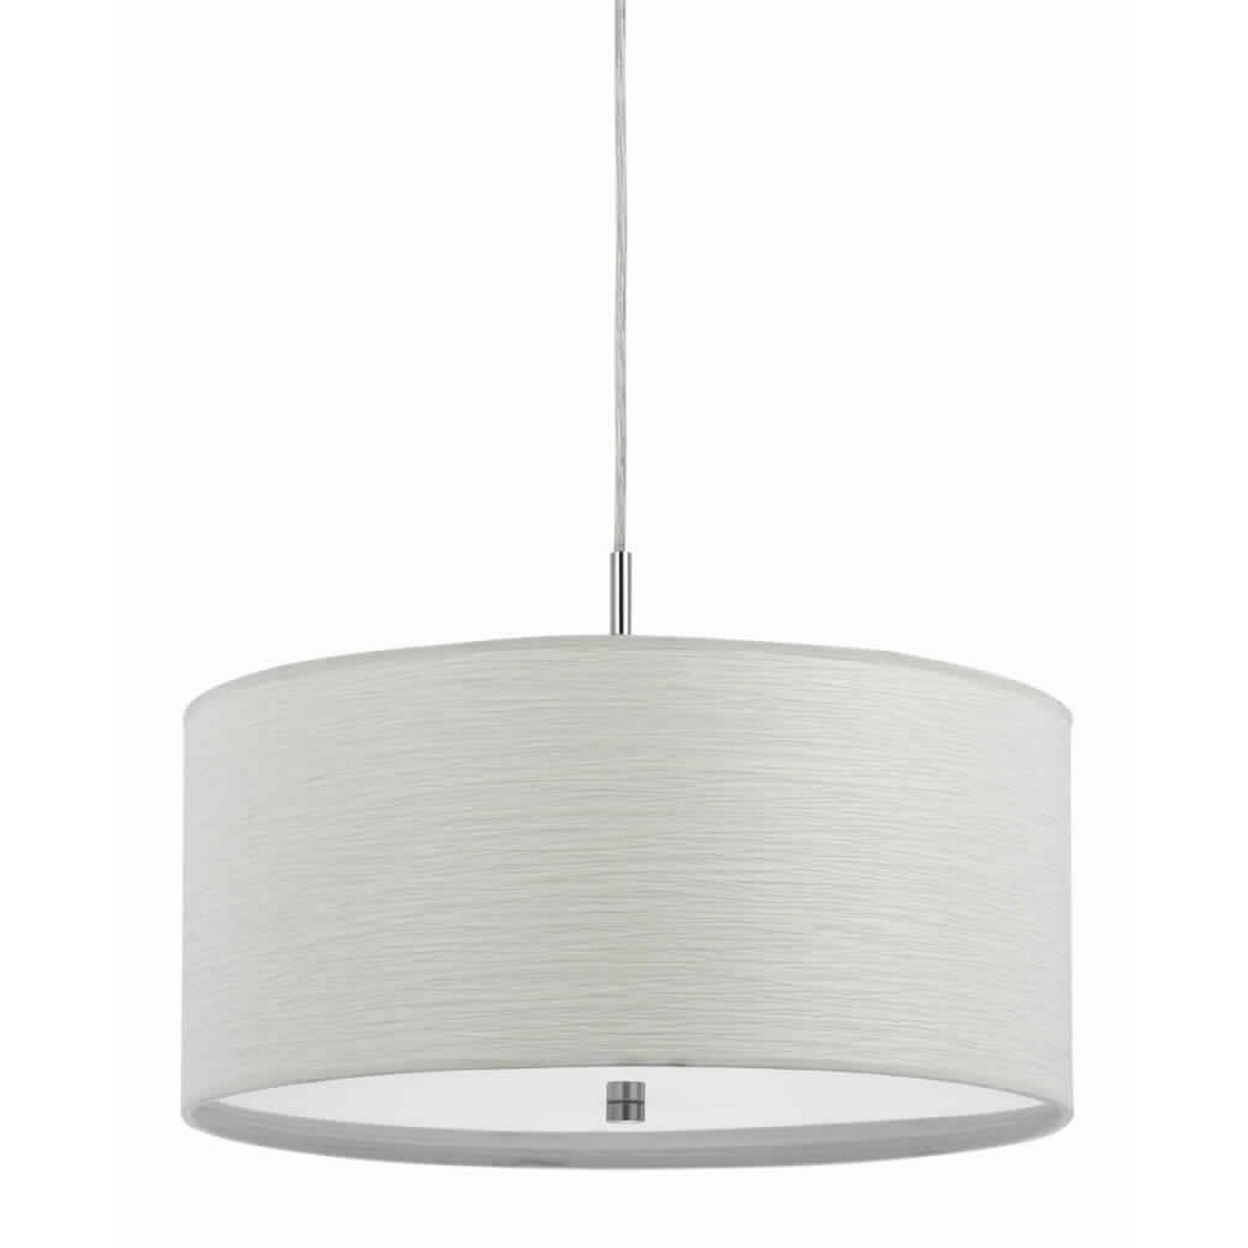 Drum Style Pendant Fixture With Fabric Shade And Brushed Details, White- Saltoro Sherpi